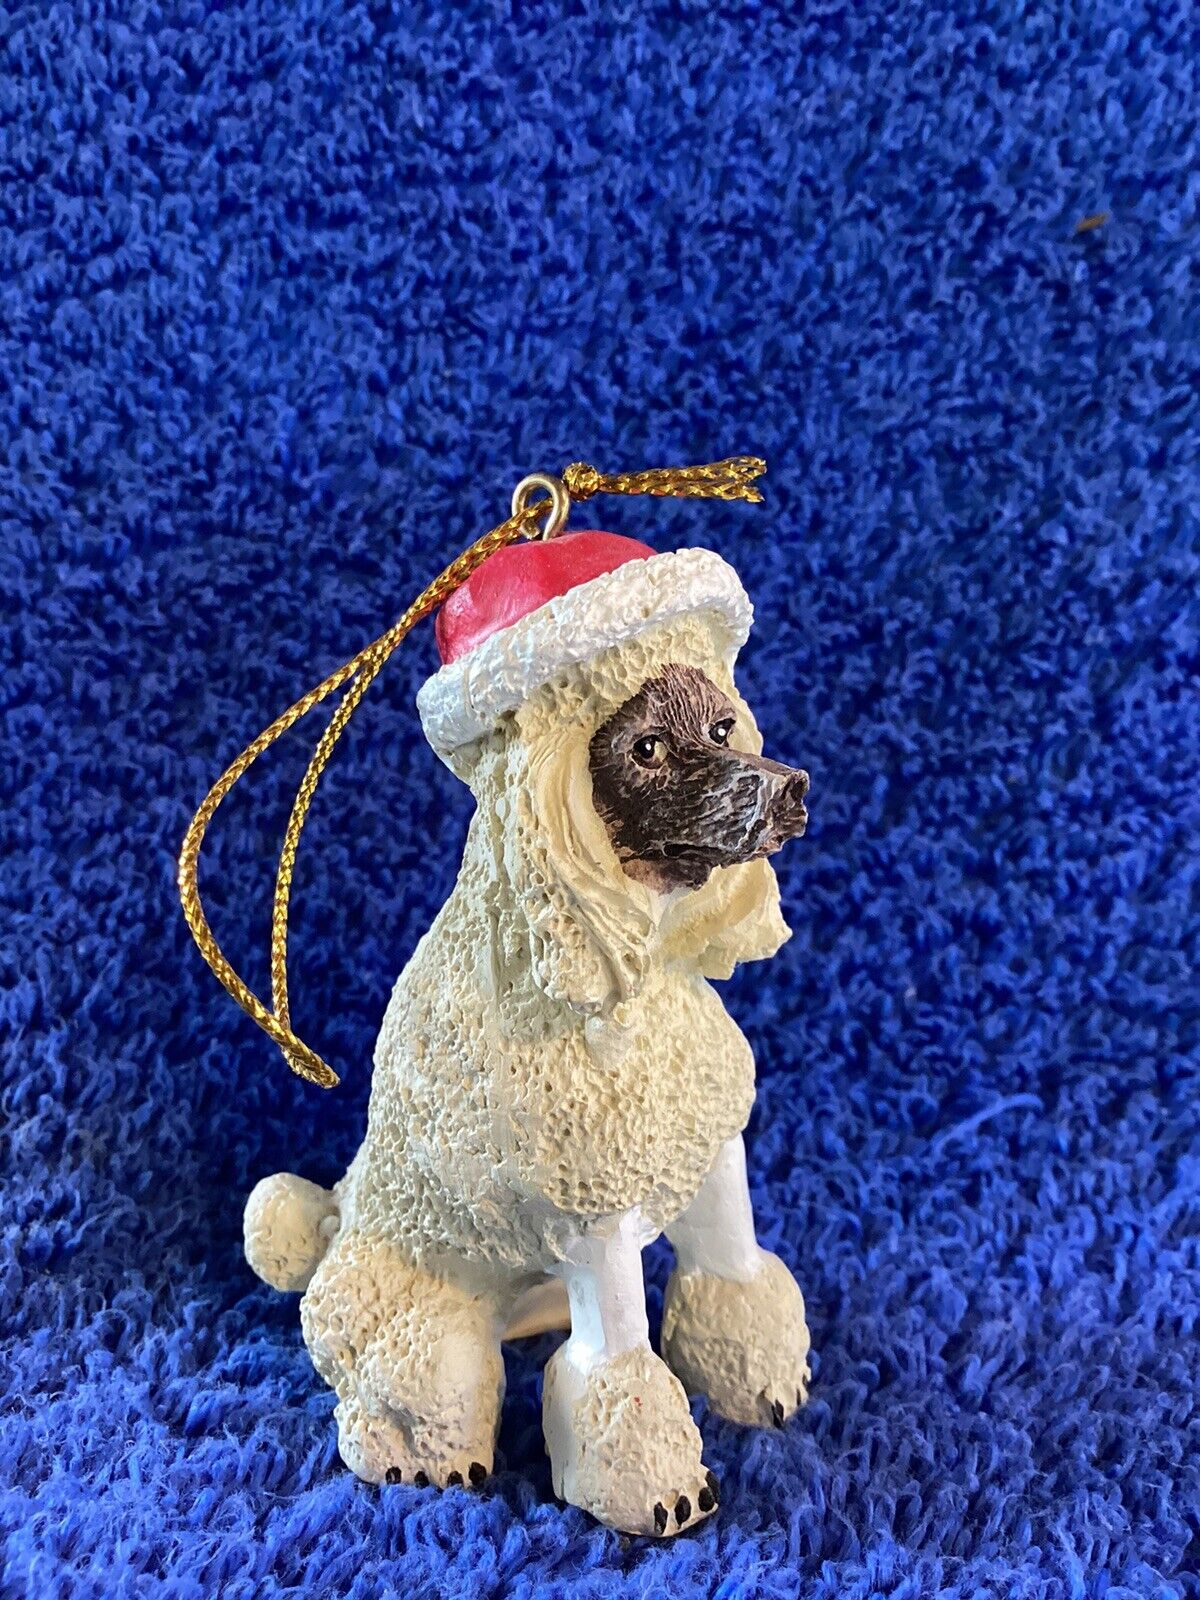 Poodle Christmas Tree Dog Ornament By Regent Products Corp, 3 Inches Tall